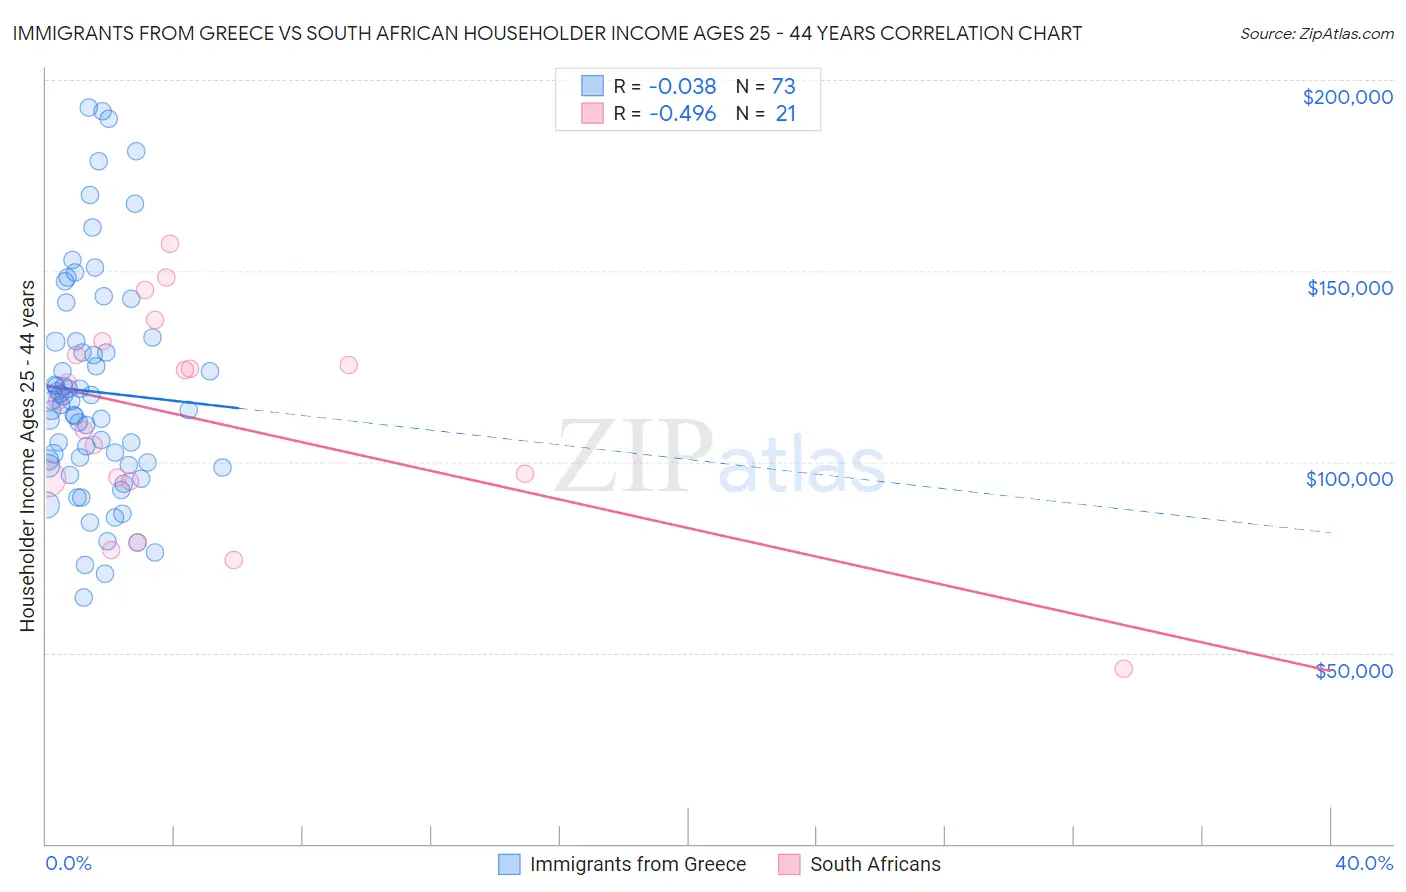 Immigrants from Greece vs South African Householder Income Ages 25 - 44 years